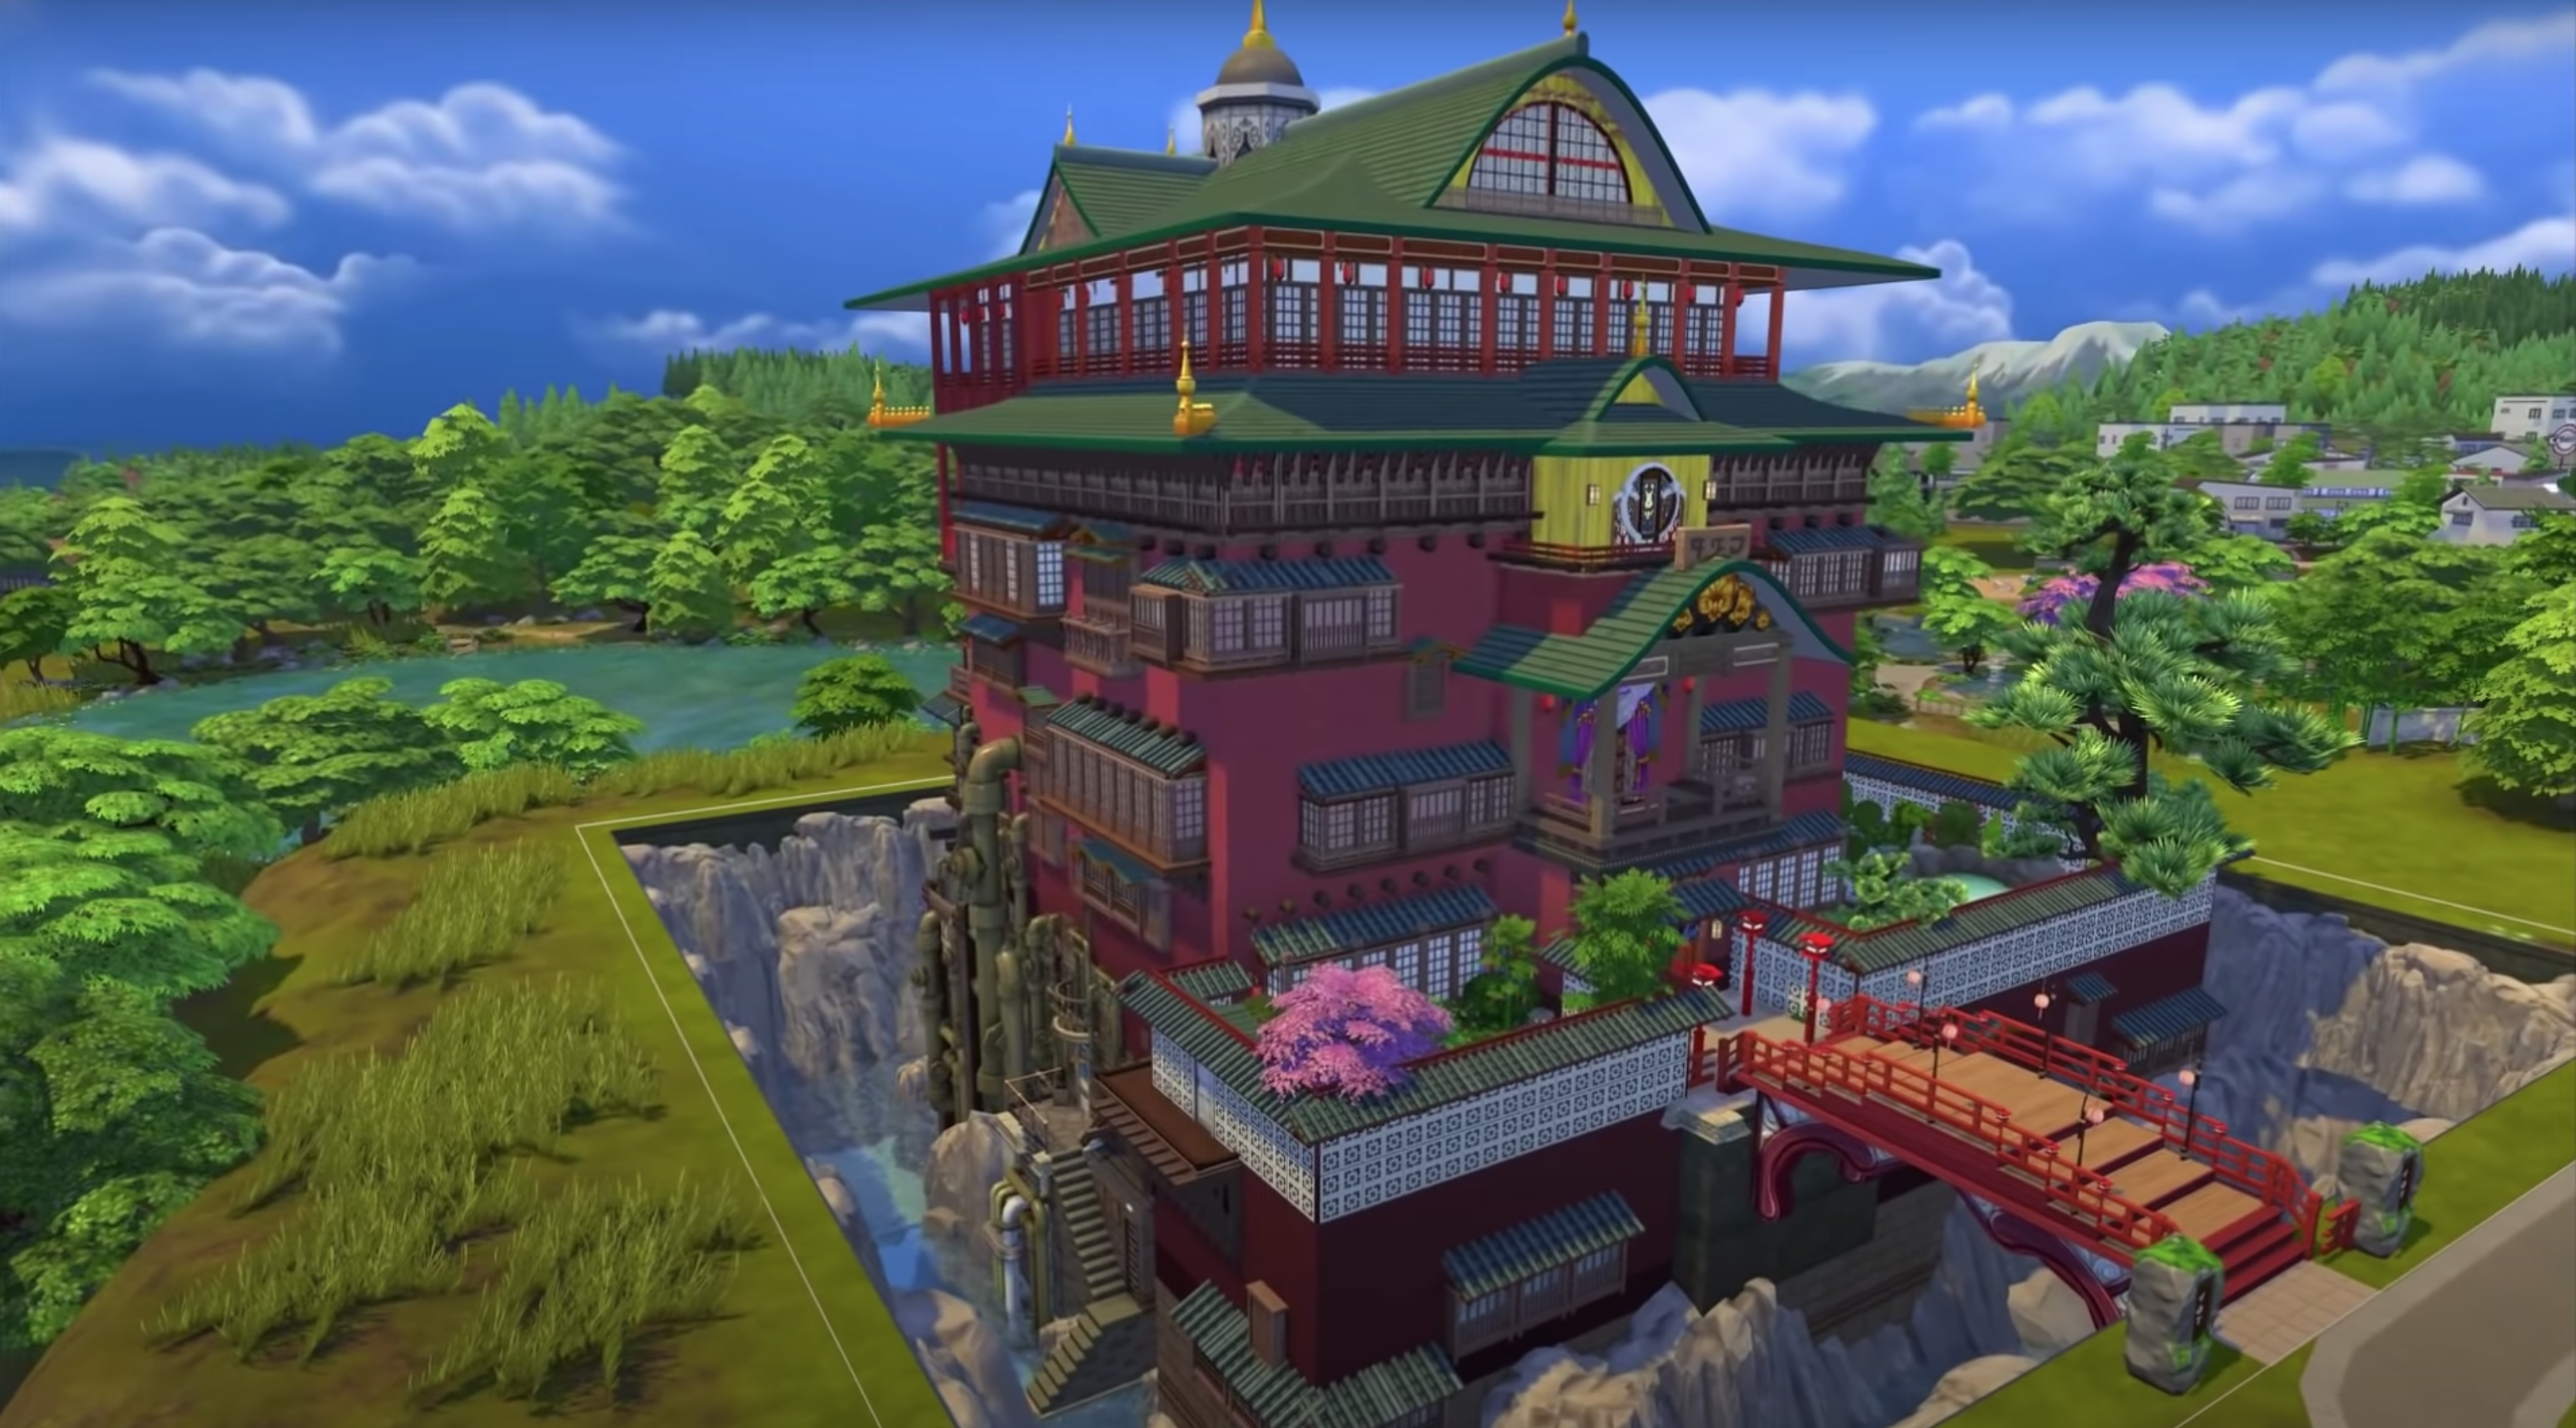 Help! I'm obsessed with... this Sims version of the Spirited Away bathhouse